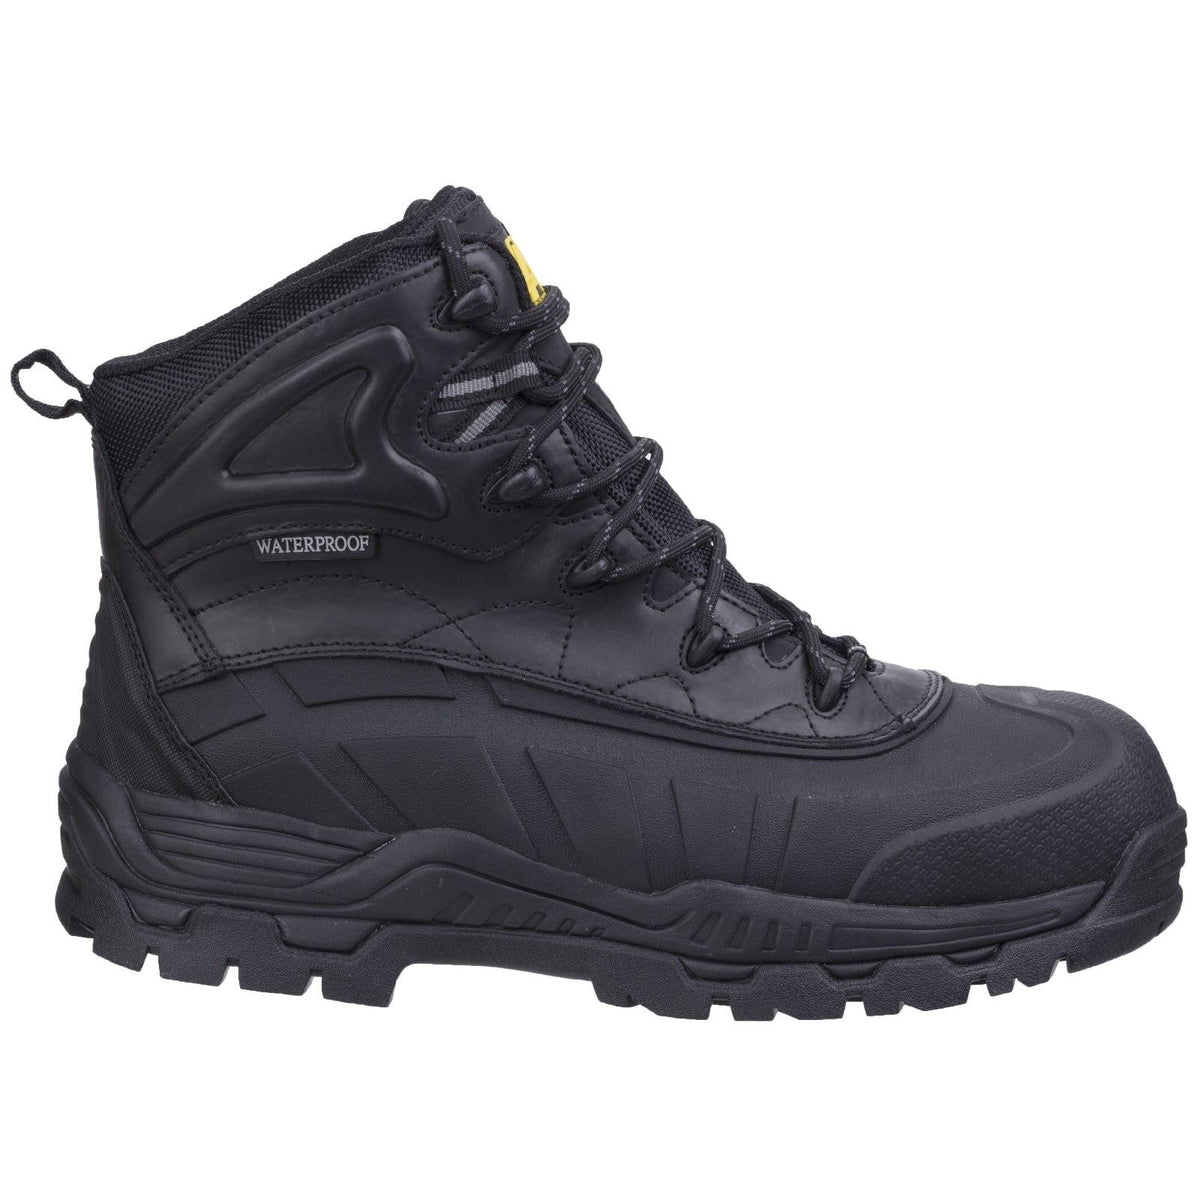 Amblers Safety FS430 Hybrid Waterproof Non-Metal Safety Boots